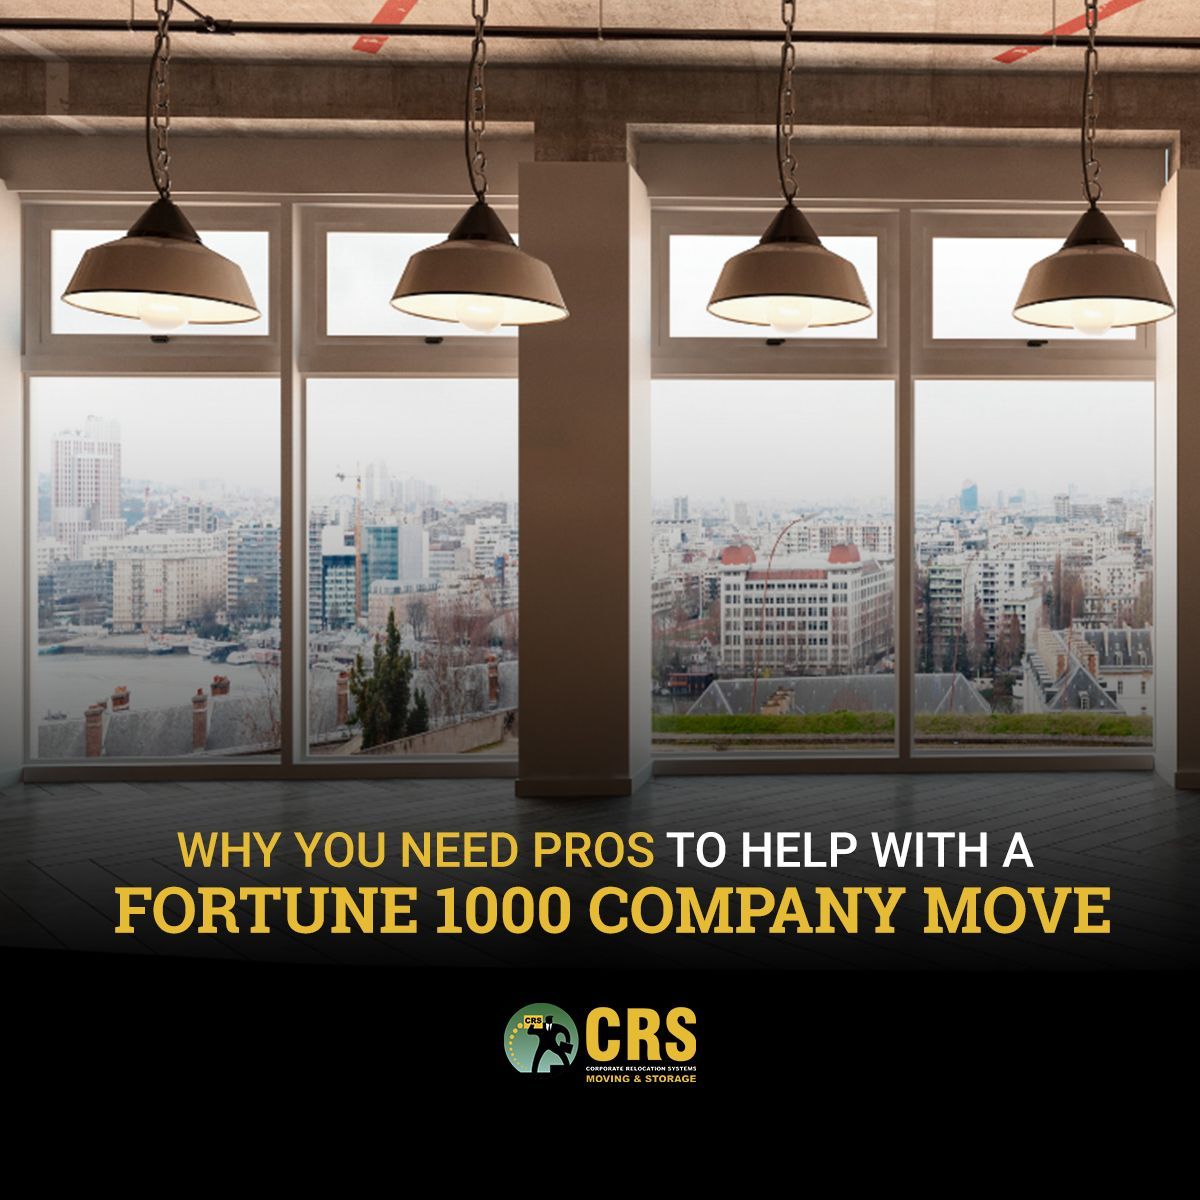 Moving a Fortune 1000 can be daunting, but with CRS Moving & Storage, you don't have to handle it alone. Find out how we can help on our blog: buff.ly/3xzRkd3 

#OfficeLiquidation #OfficeStorage #OfficeMove #NYCMovers #CorporateMovers #NYCBusinessMovers #NYC